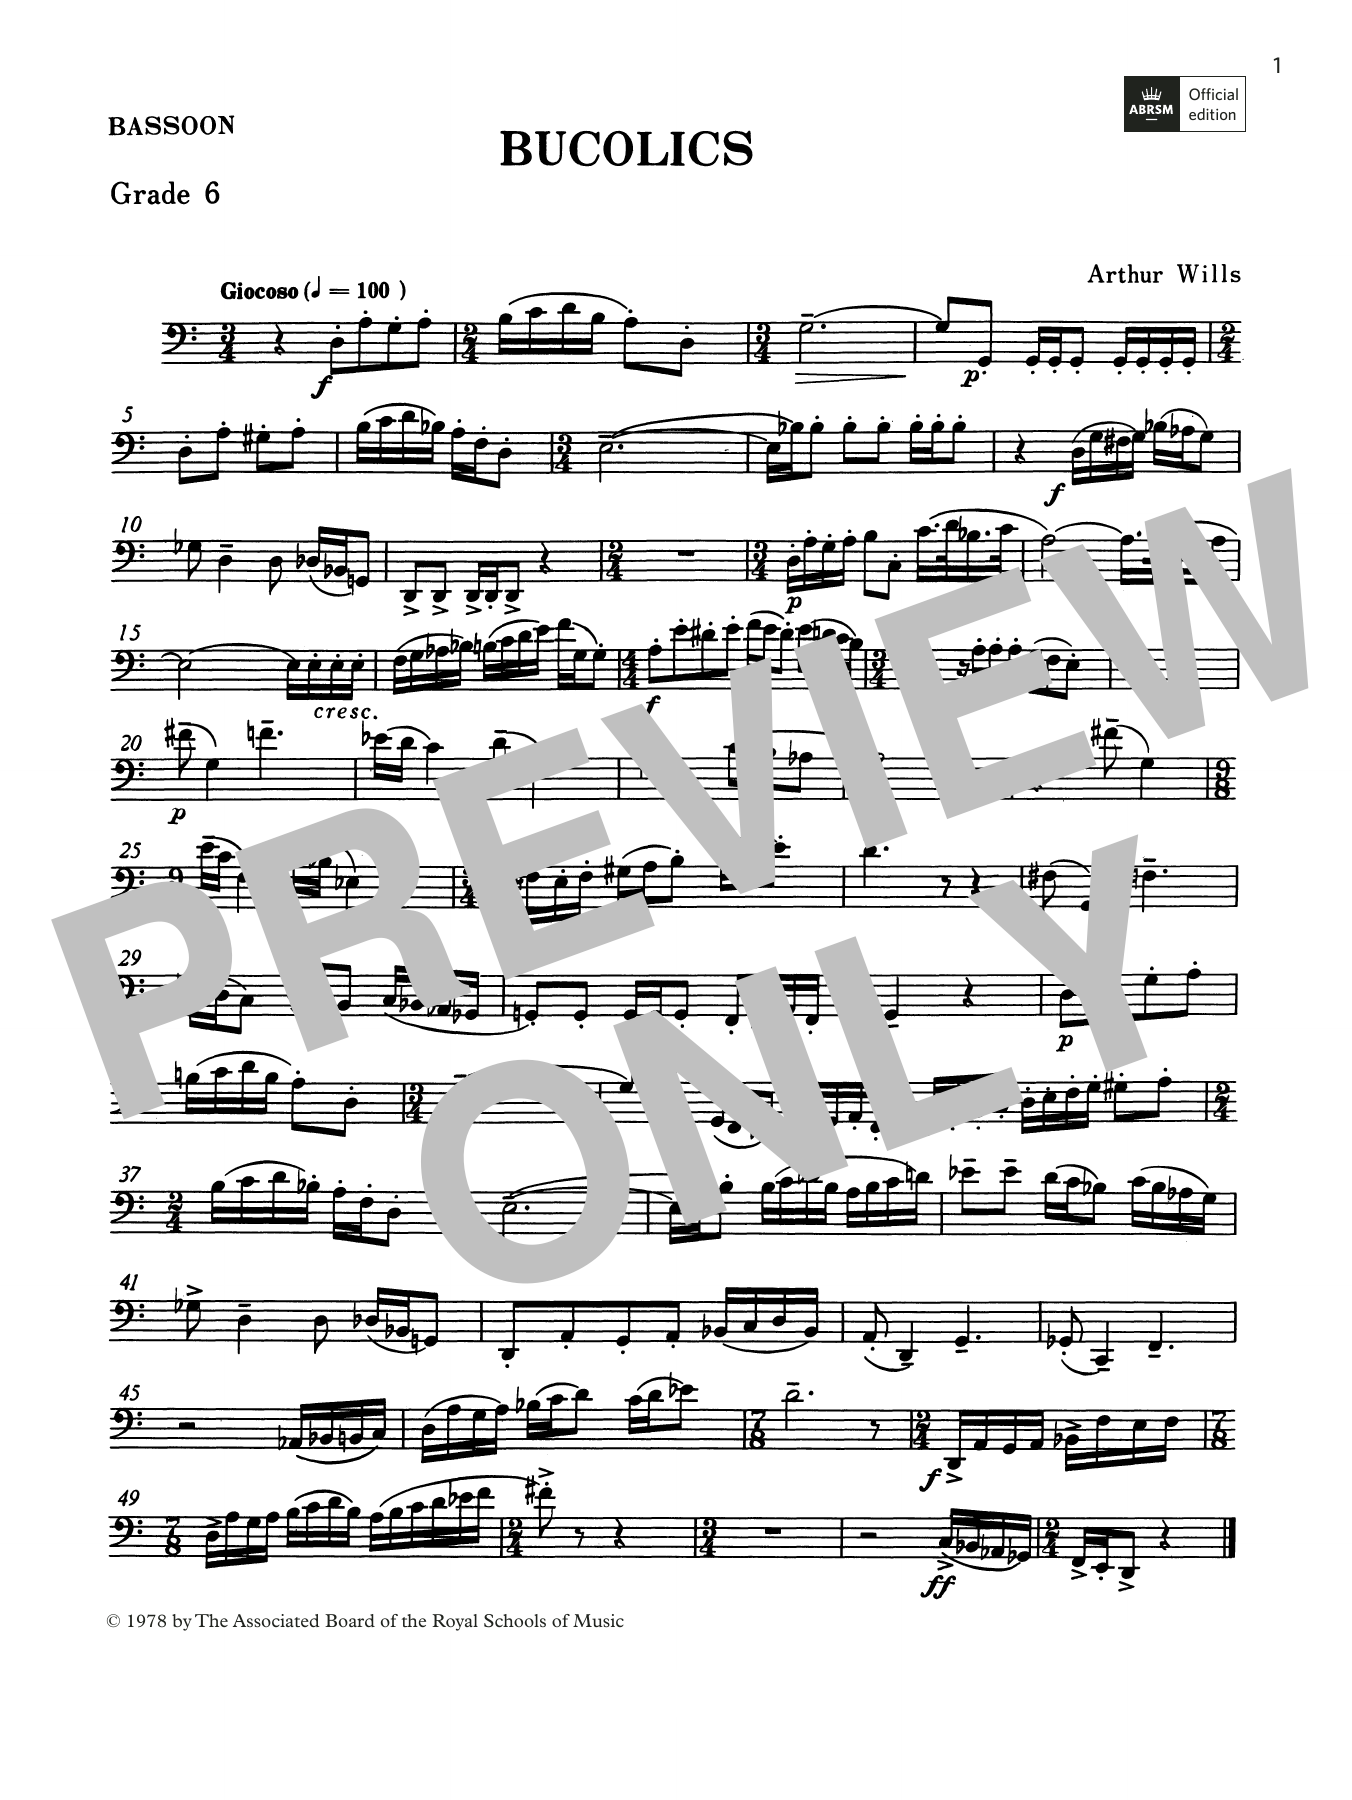 Download Arthur Wills Bucolics (Grade 6 List C10 from the ABR Sheet Music